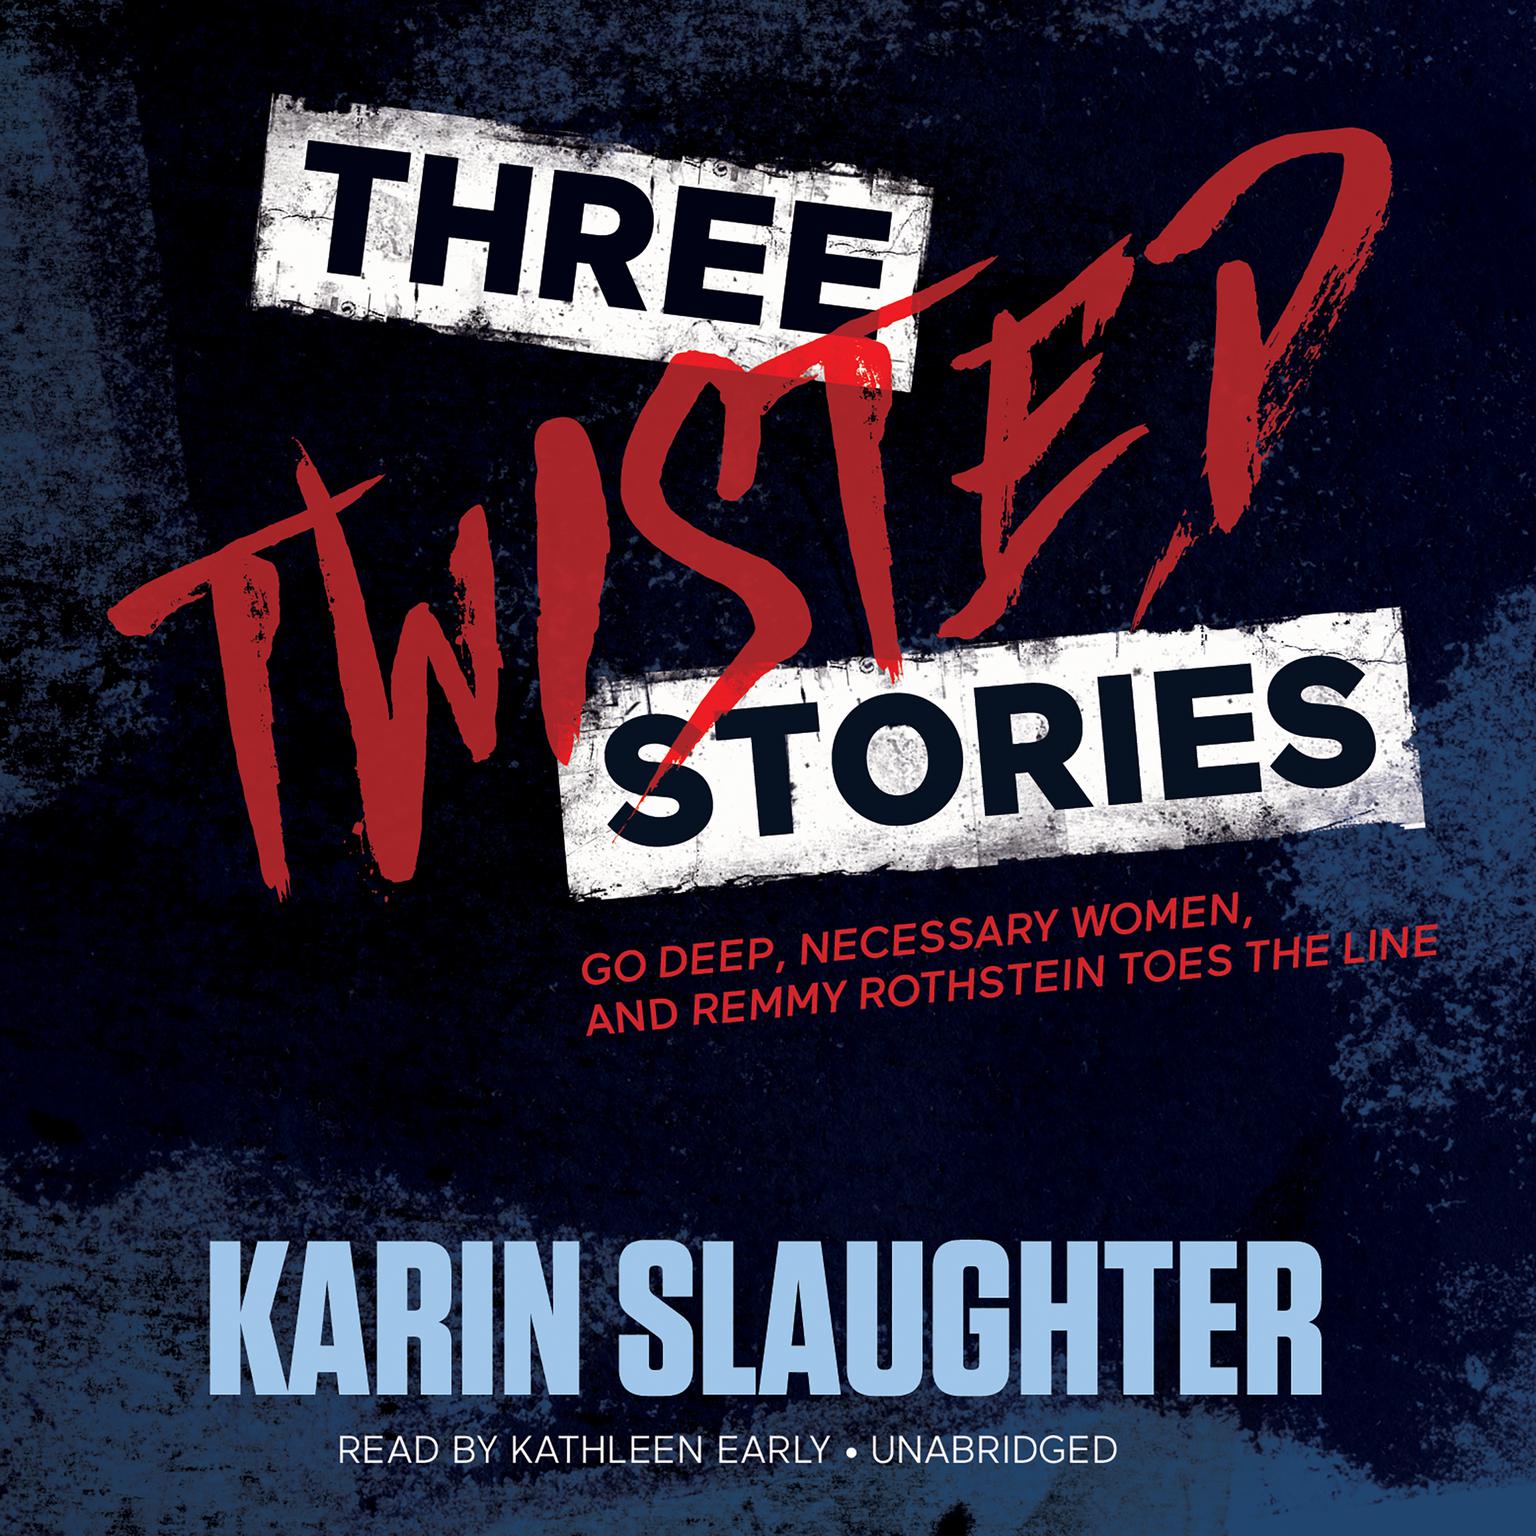 Three Twisted Stories: Go Deep, Necessary Women, and Remmy Rothstein Toes the Line Audiobook, by Karin Slaughter